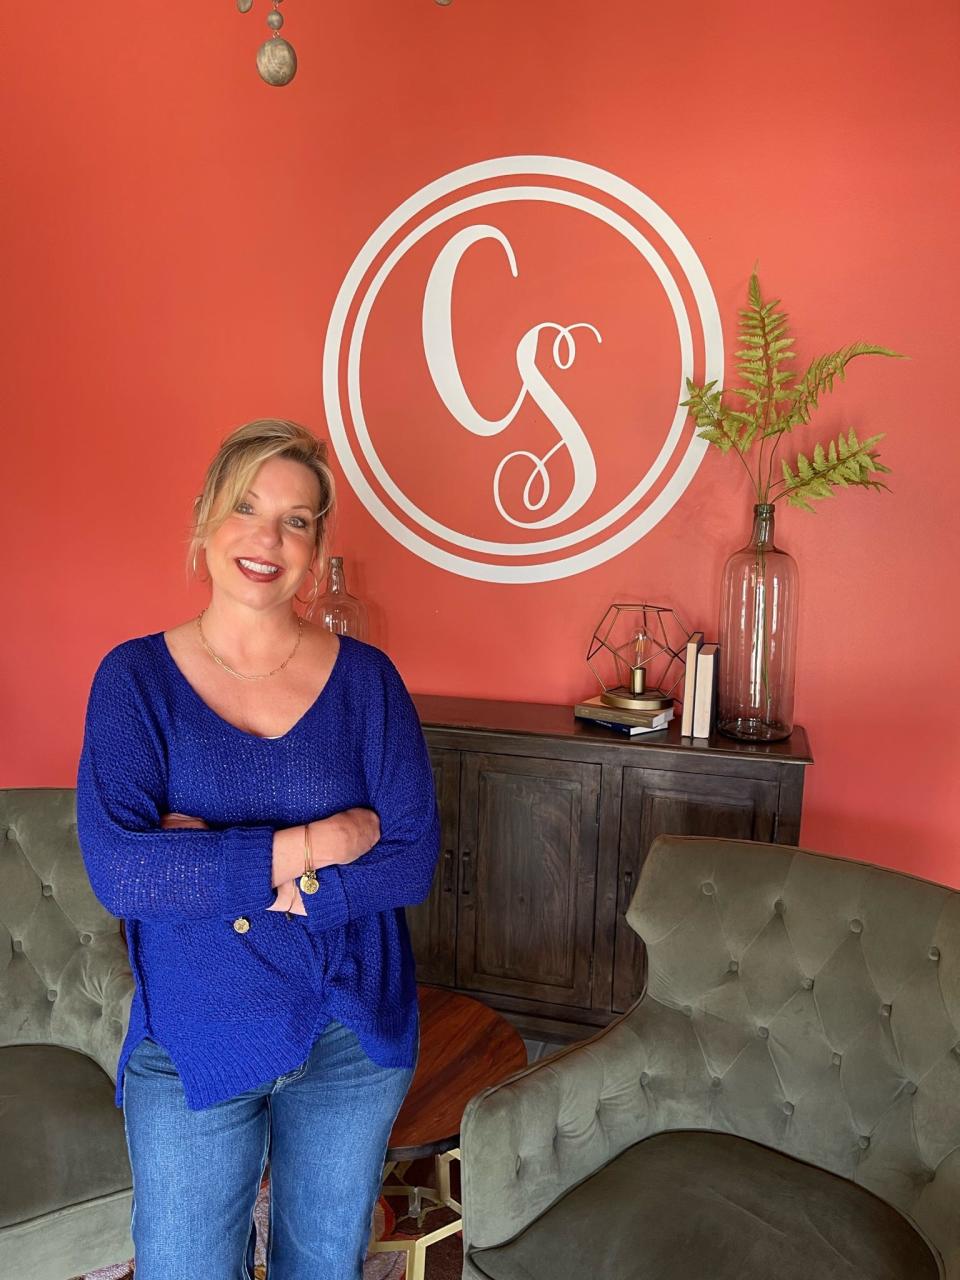 Coral Sash owner Karen Backus is gearing up to open a second location of her fashion boutique in downtown Brighton.